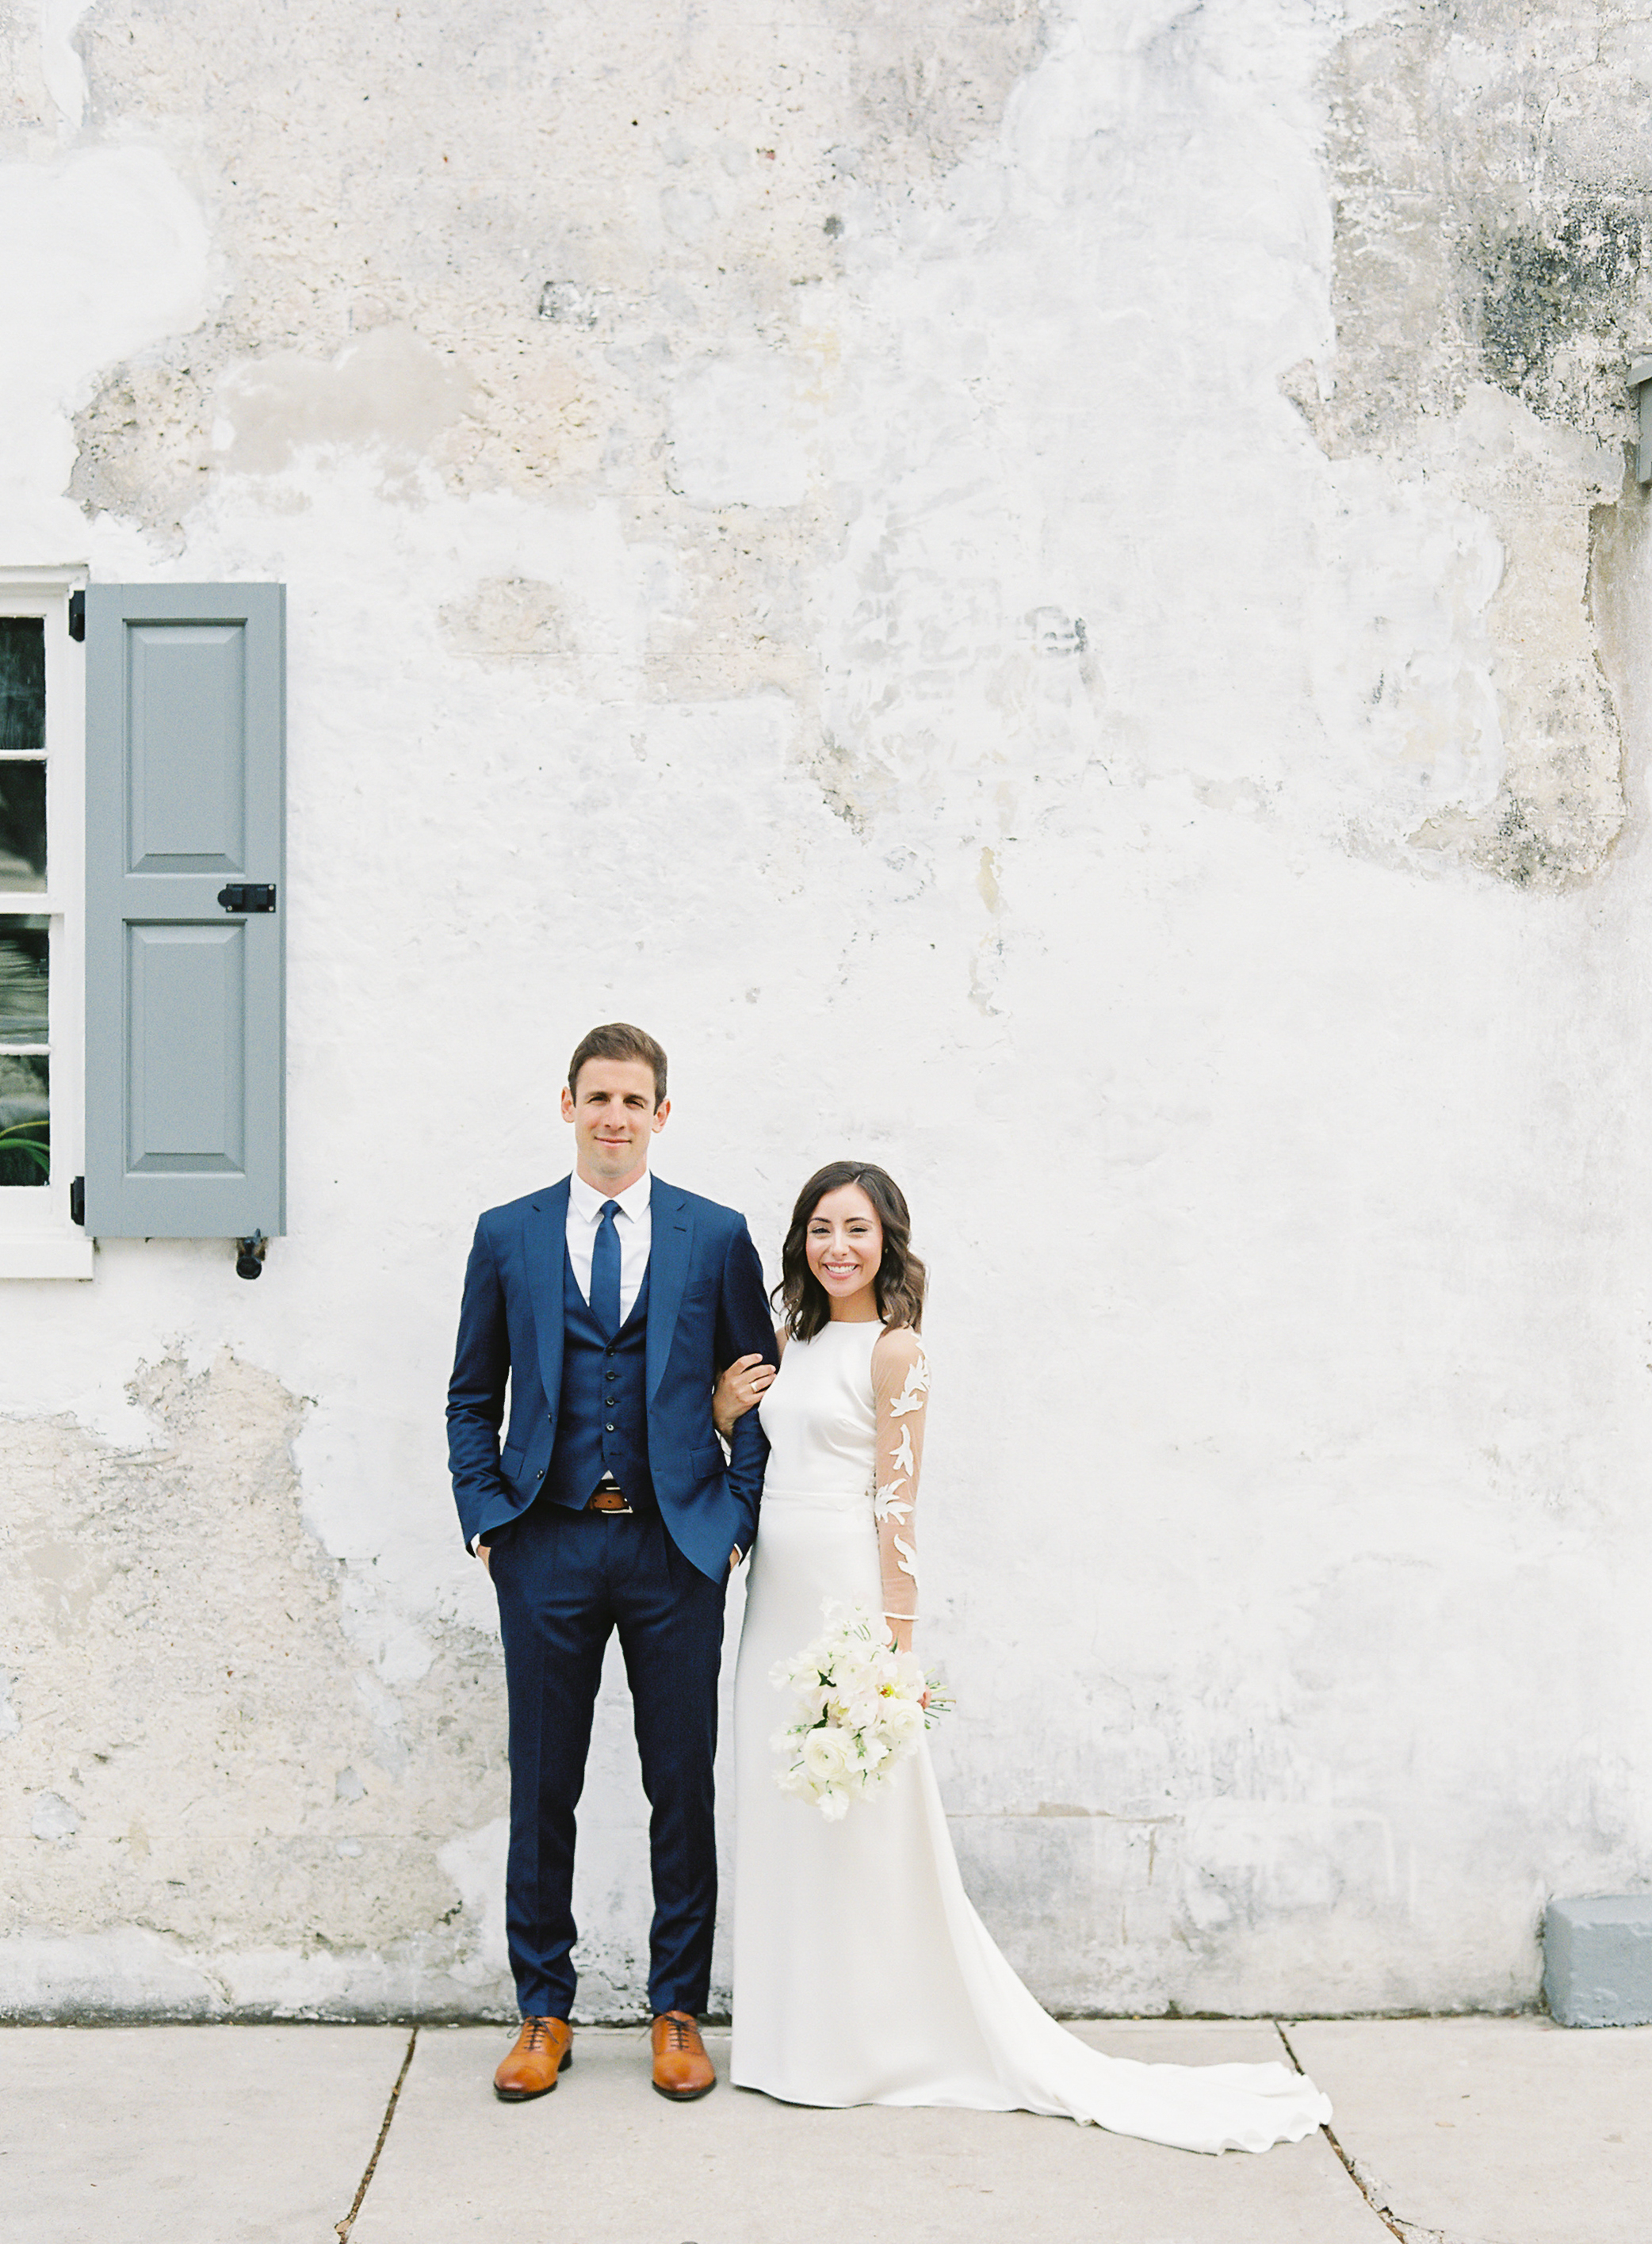 Kelly Strong Events: Downtown Charleston Wedding with O'Malley Photographers